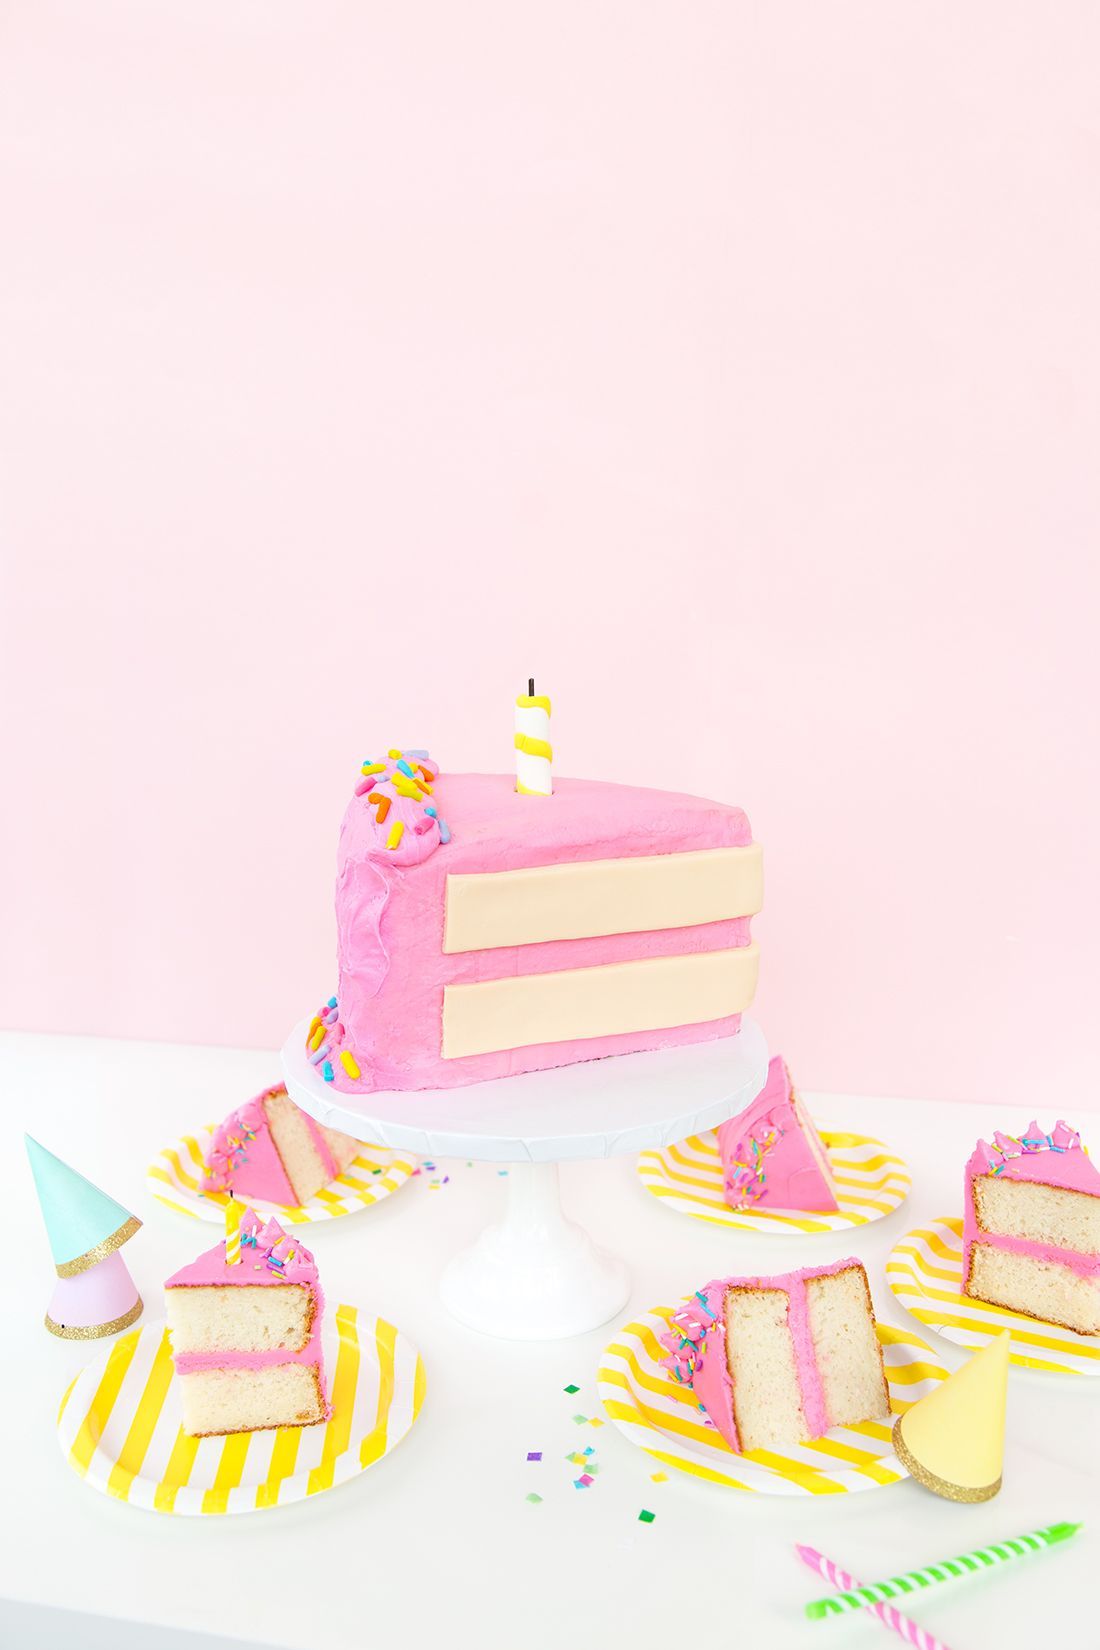 Cakes Photos, Download The BEST Free Cakes Stock Photos & HD Images